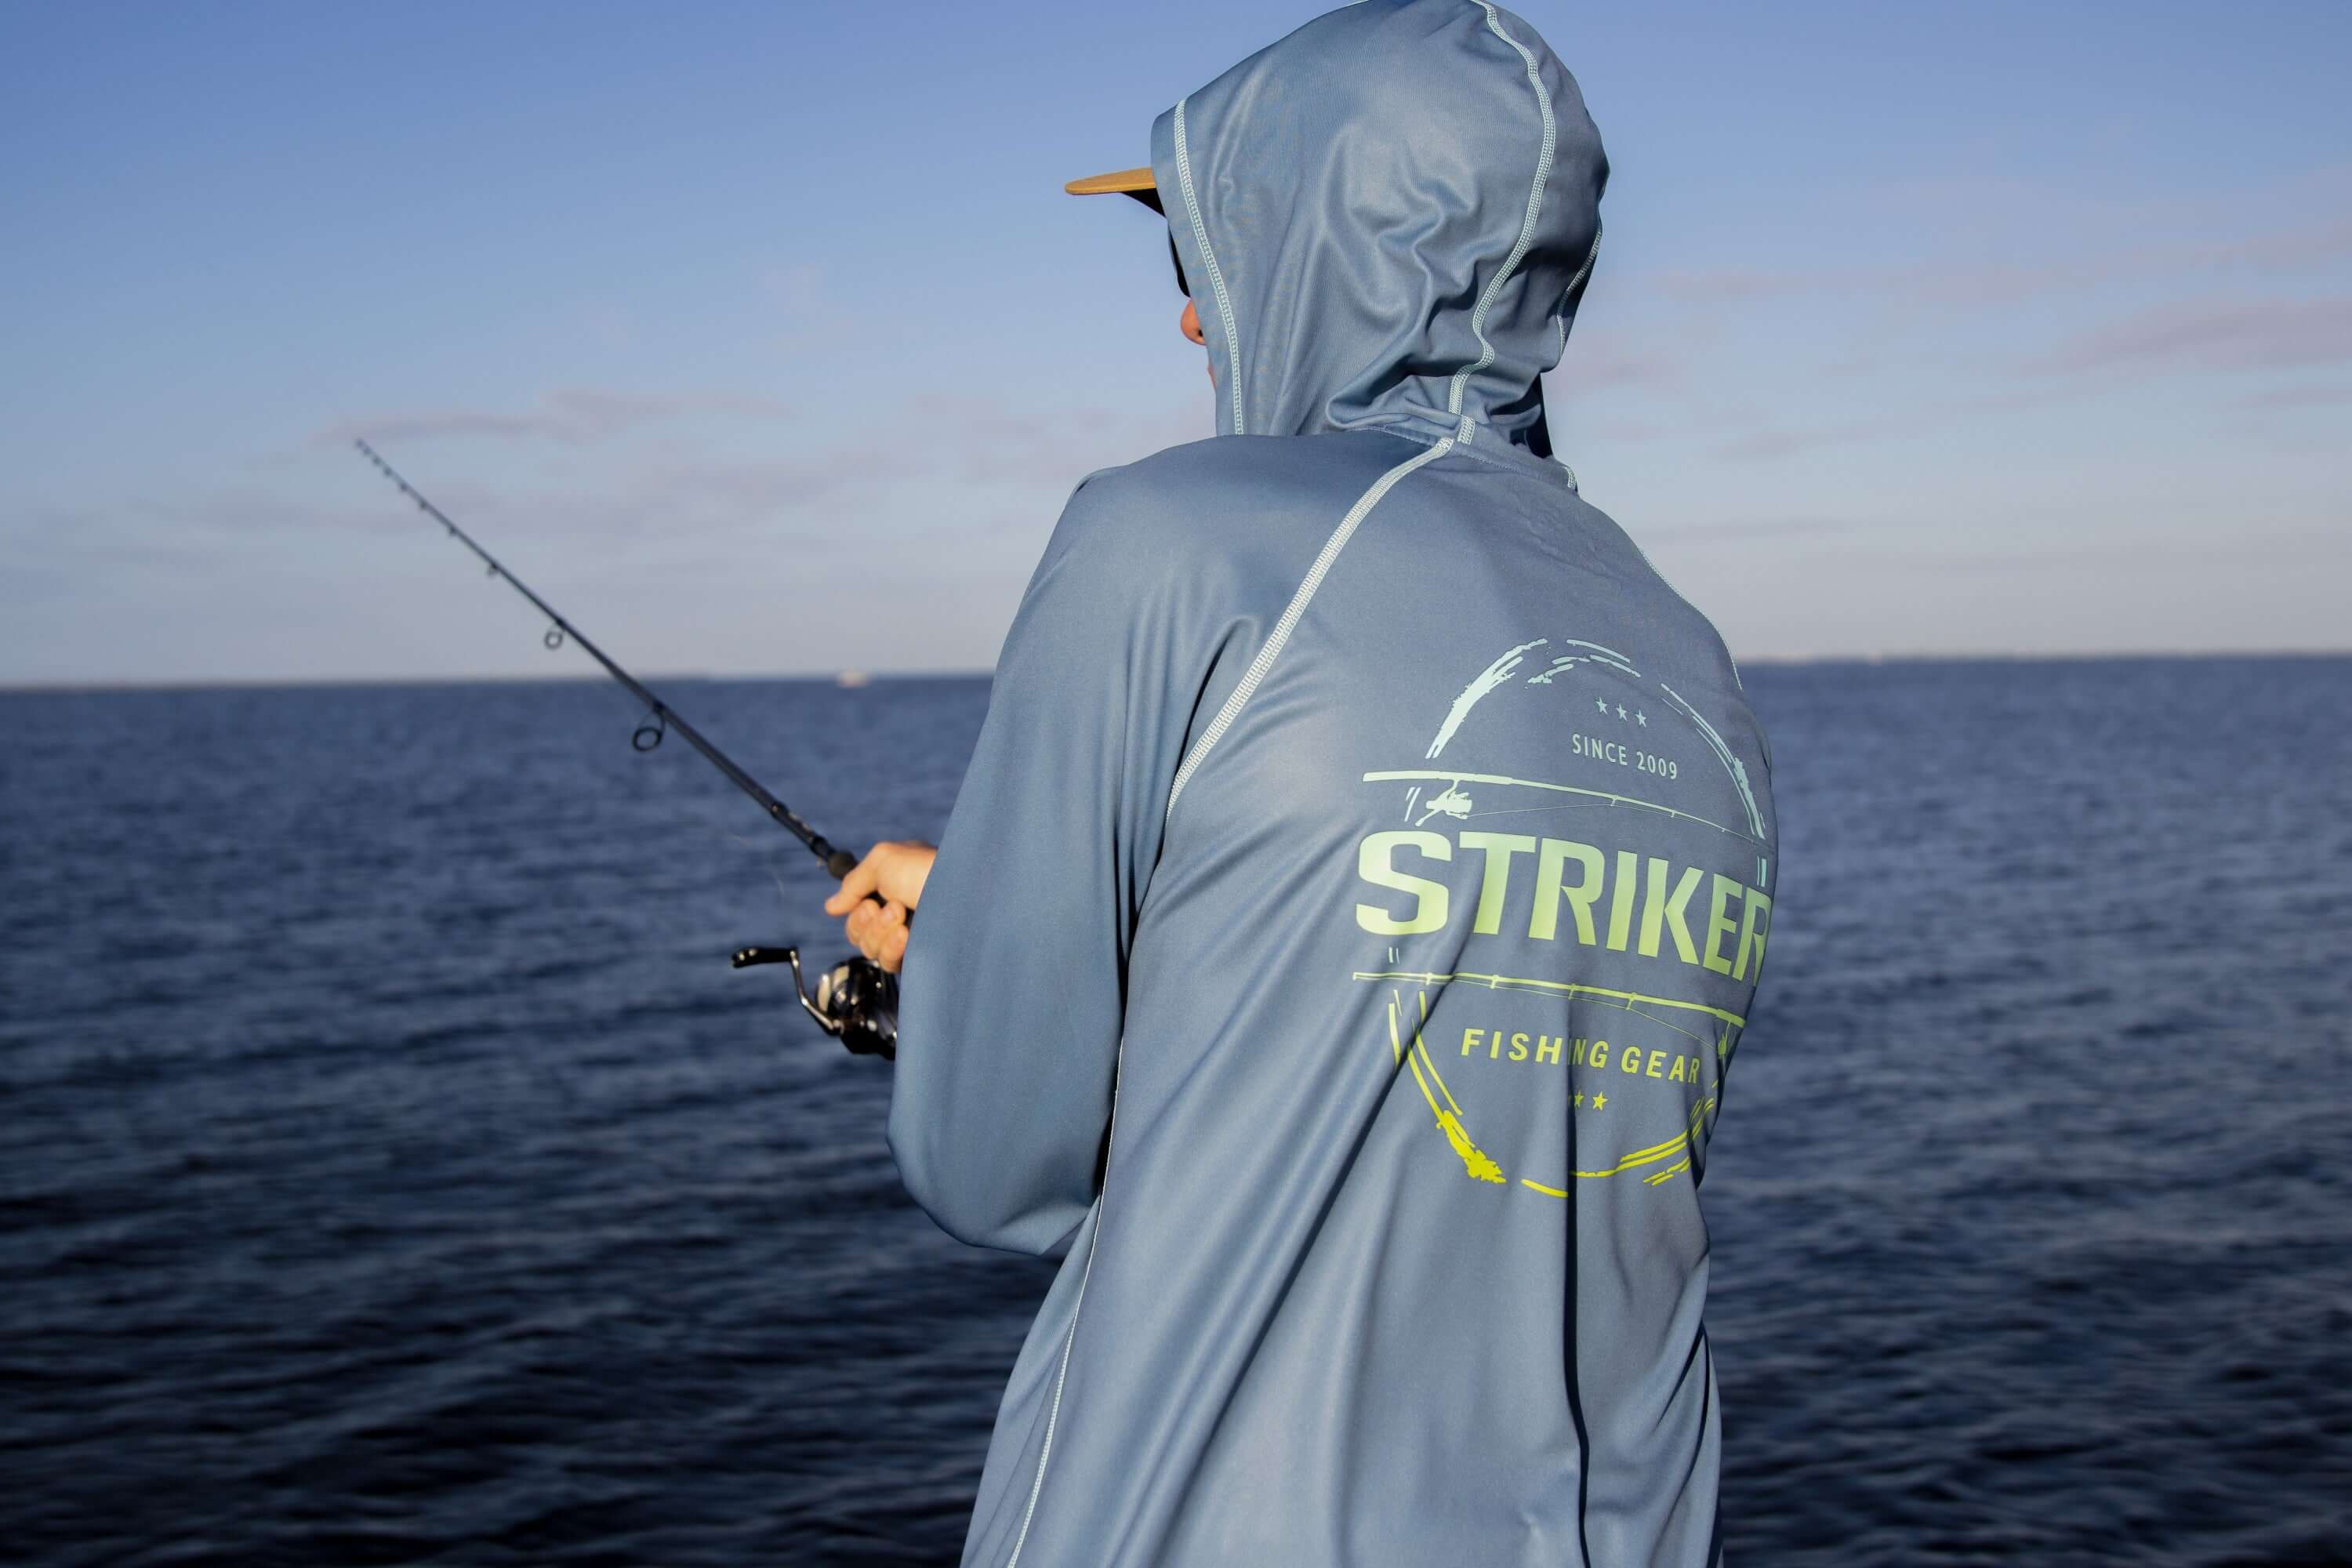 All Men's Fishing Gear & Clothes - Tops, Bottoms & More